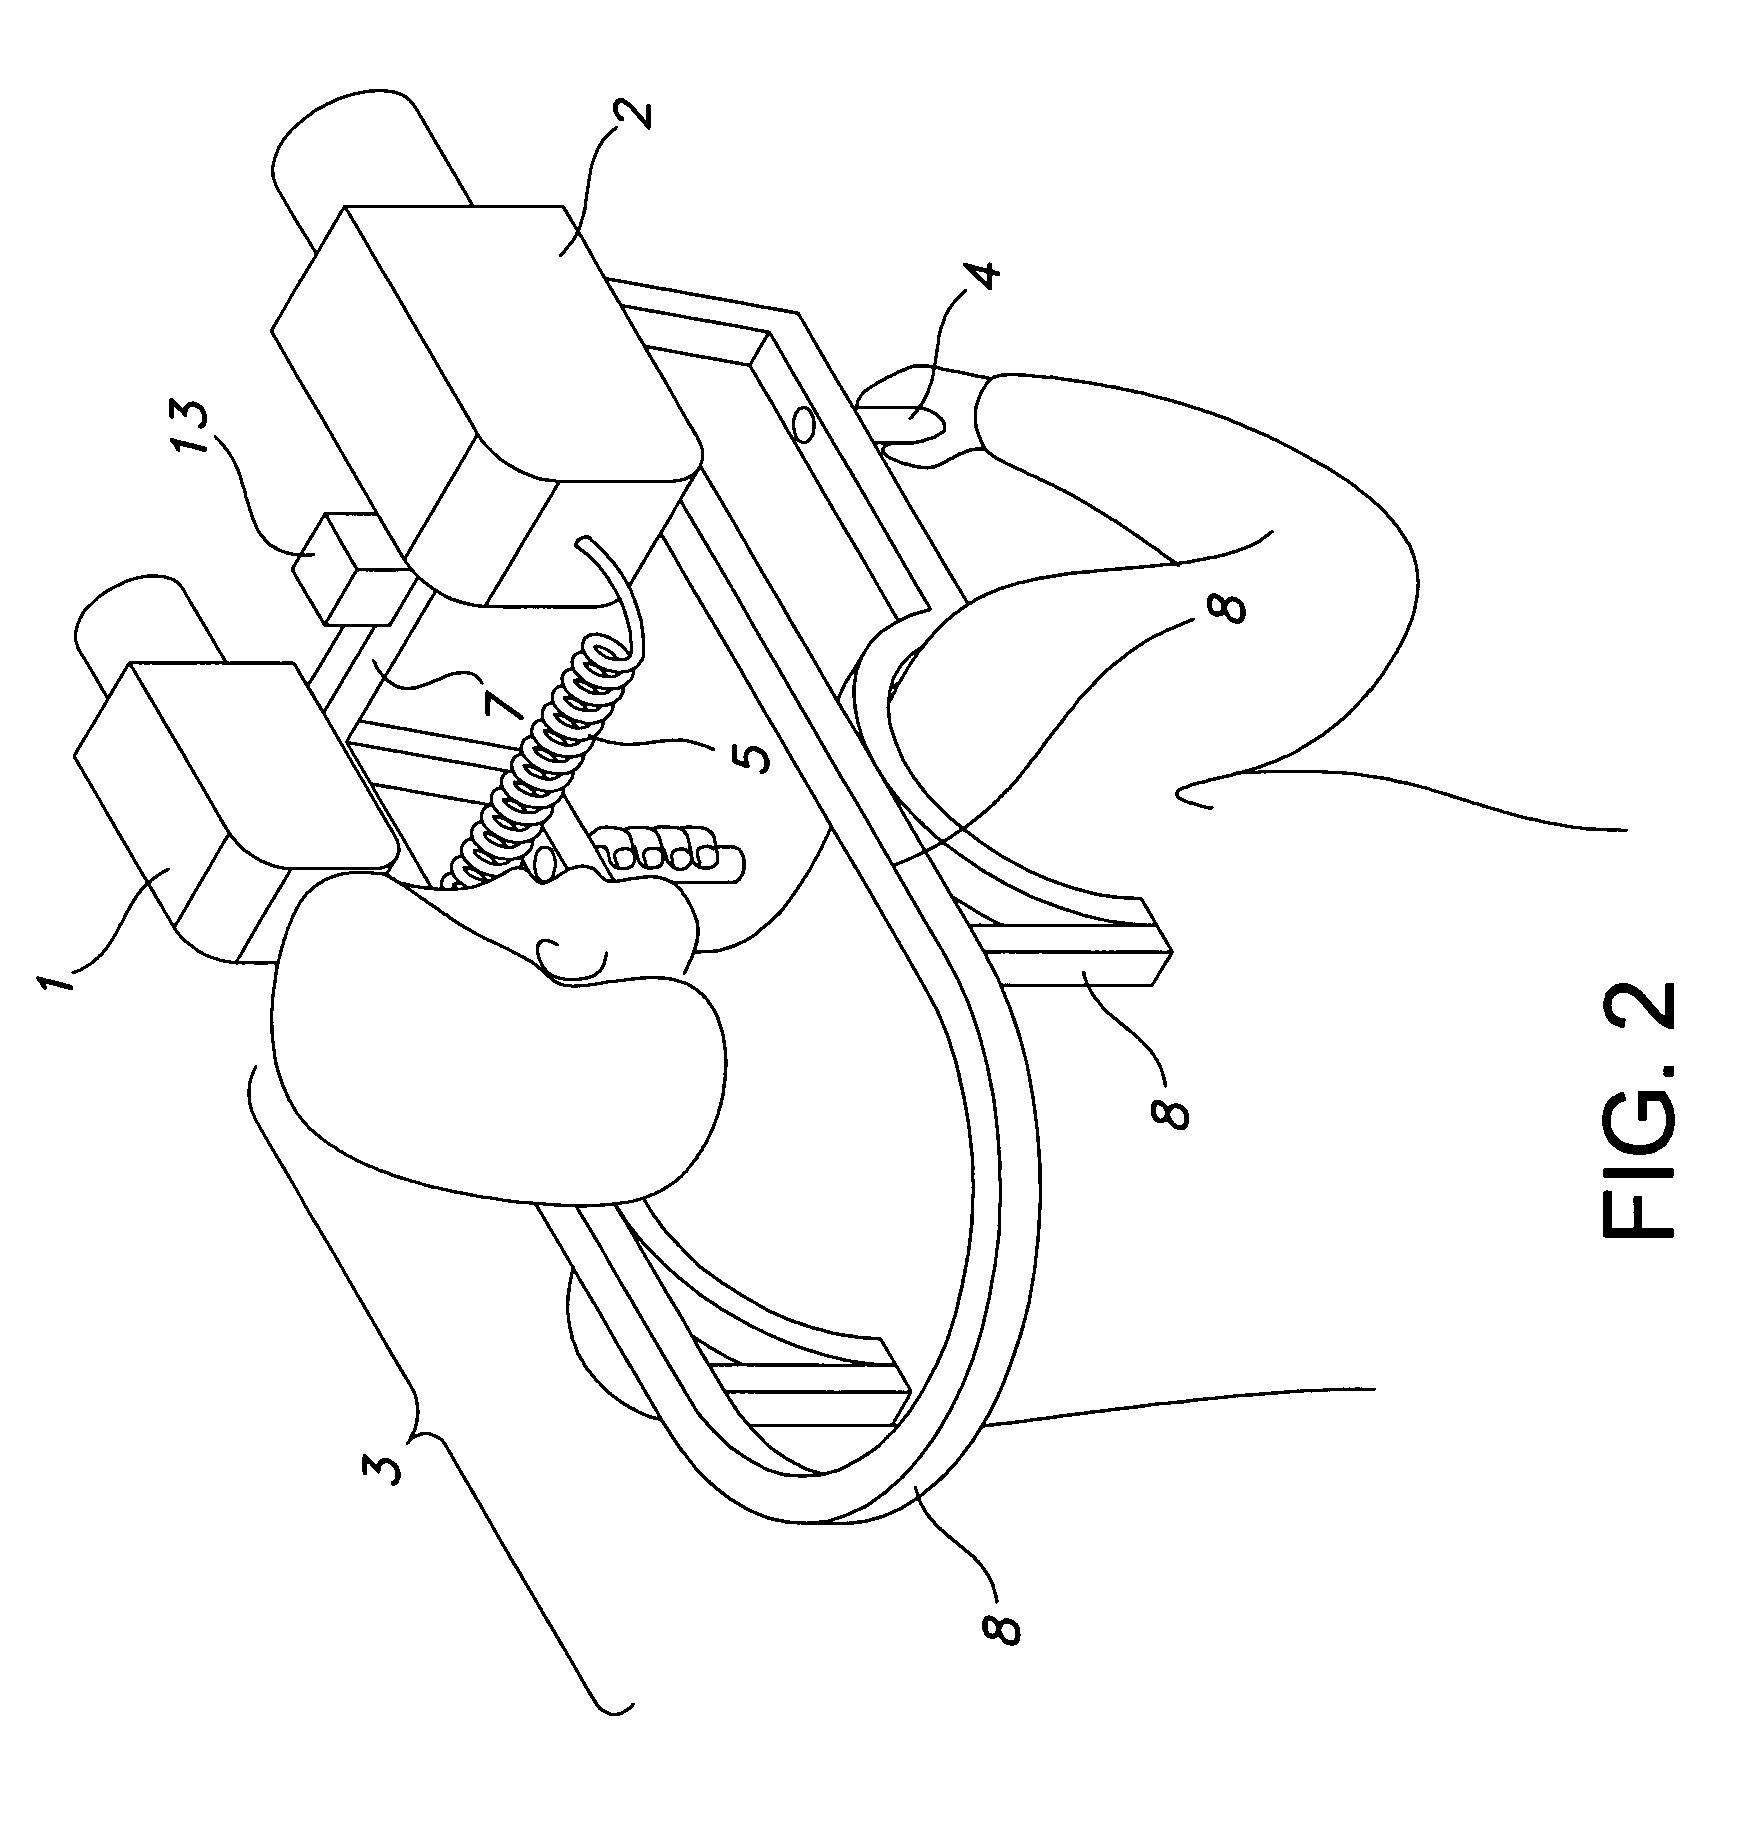 Nondestructive residential inspection method and apparatus